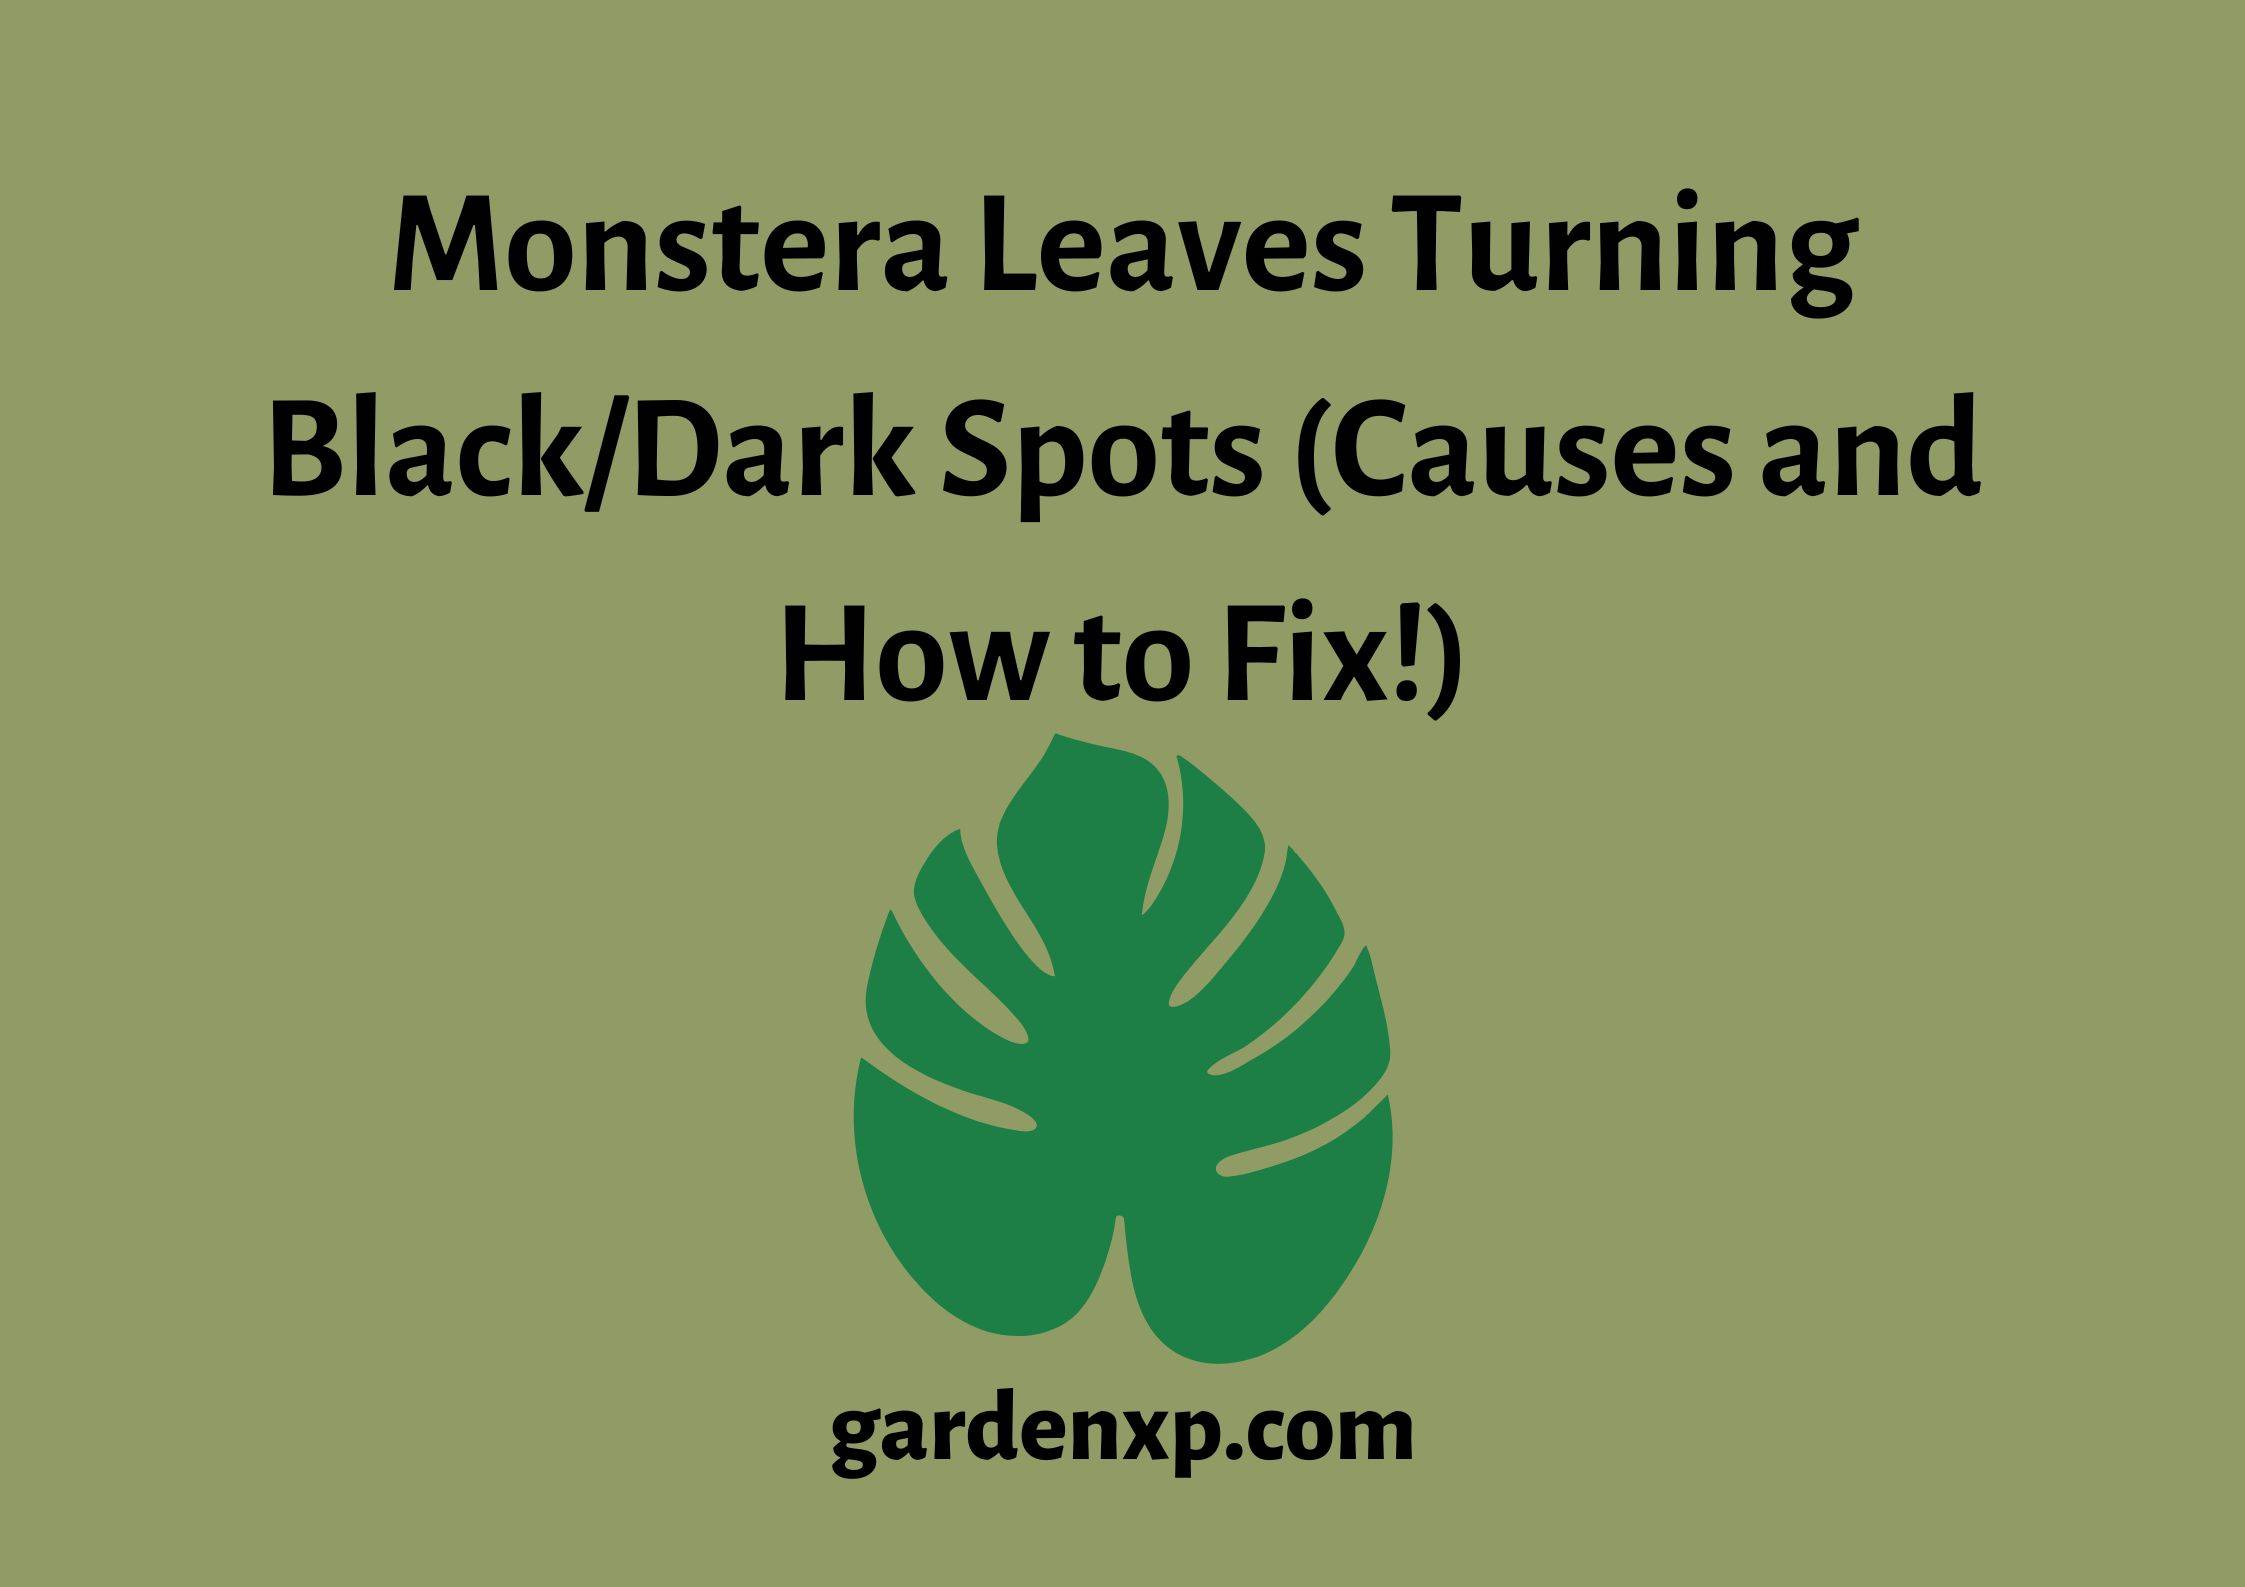 Monstera Leaves Turning Black/Dark Spots (Causes and How to Fix!)